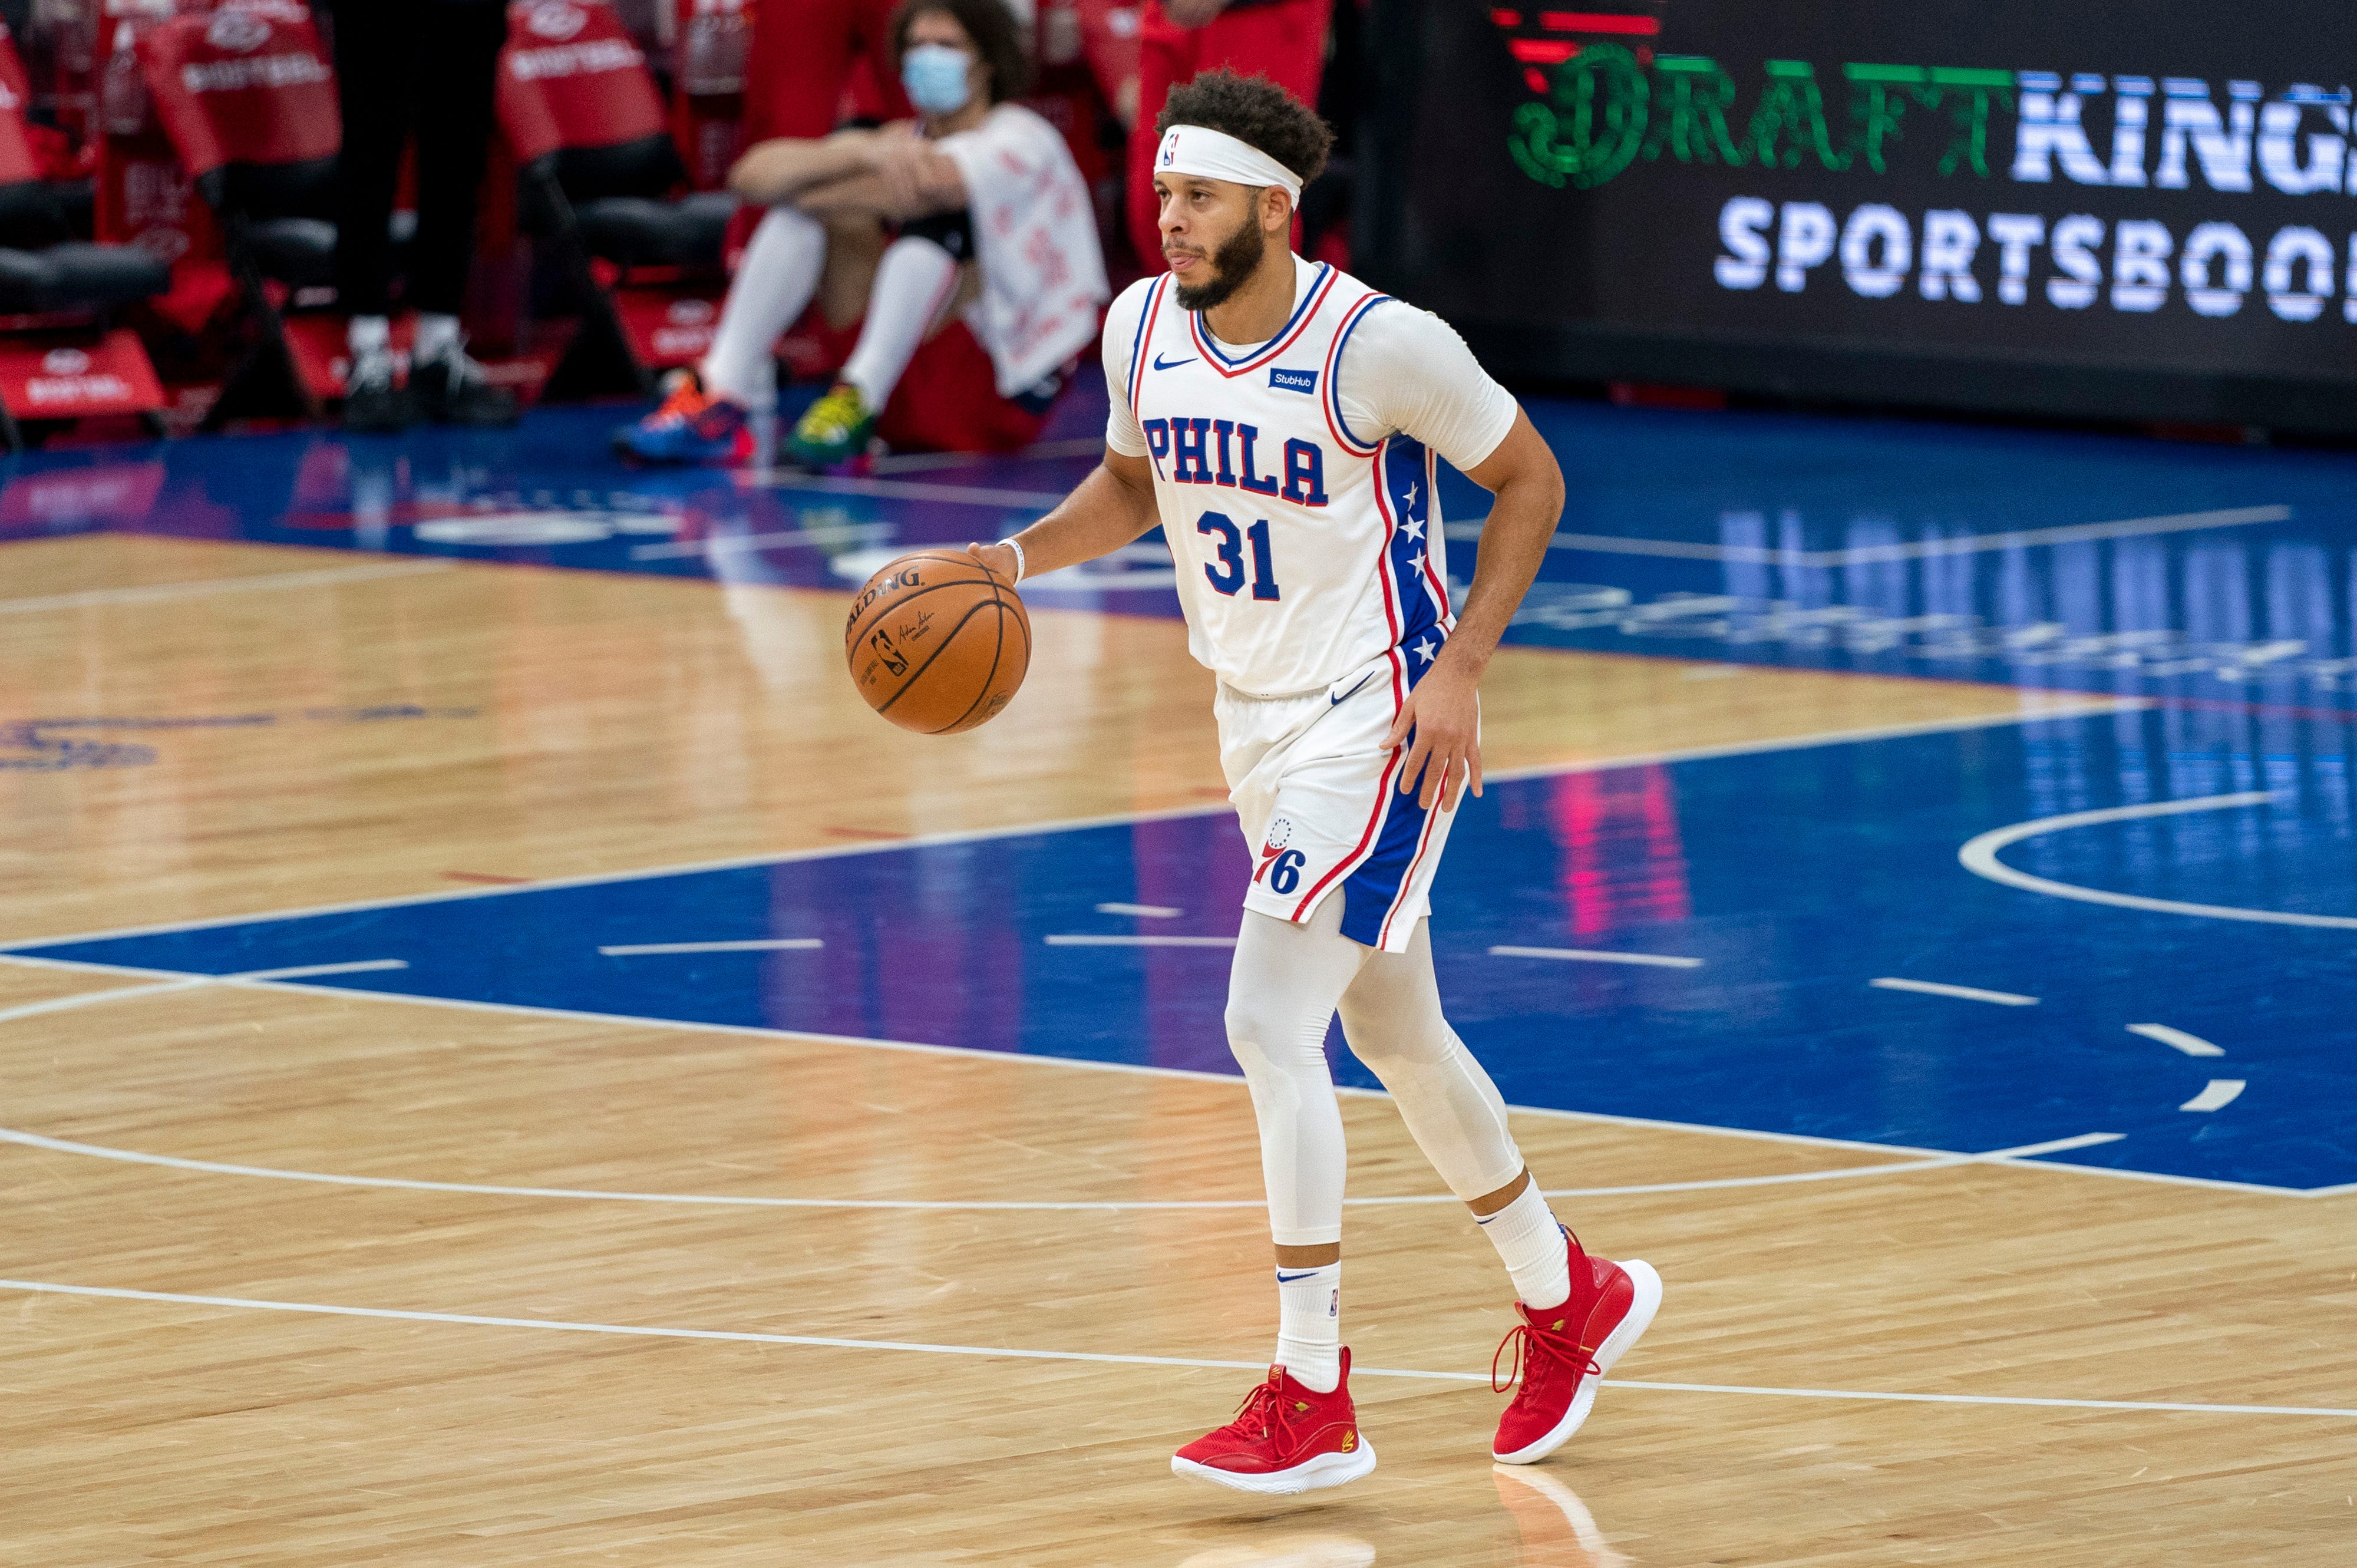 Reports: Sixers' Seth Curry tests positive for COVID-19, team to remai...